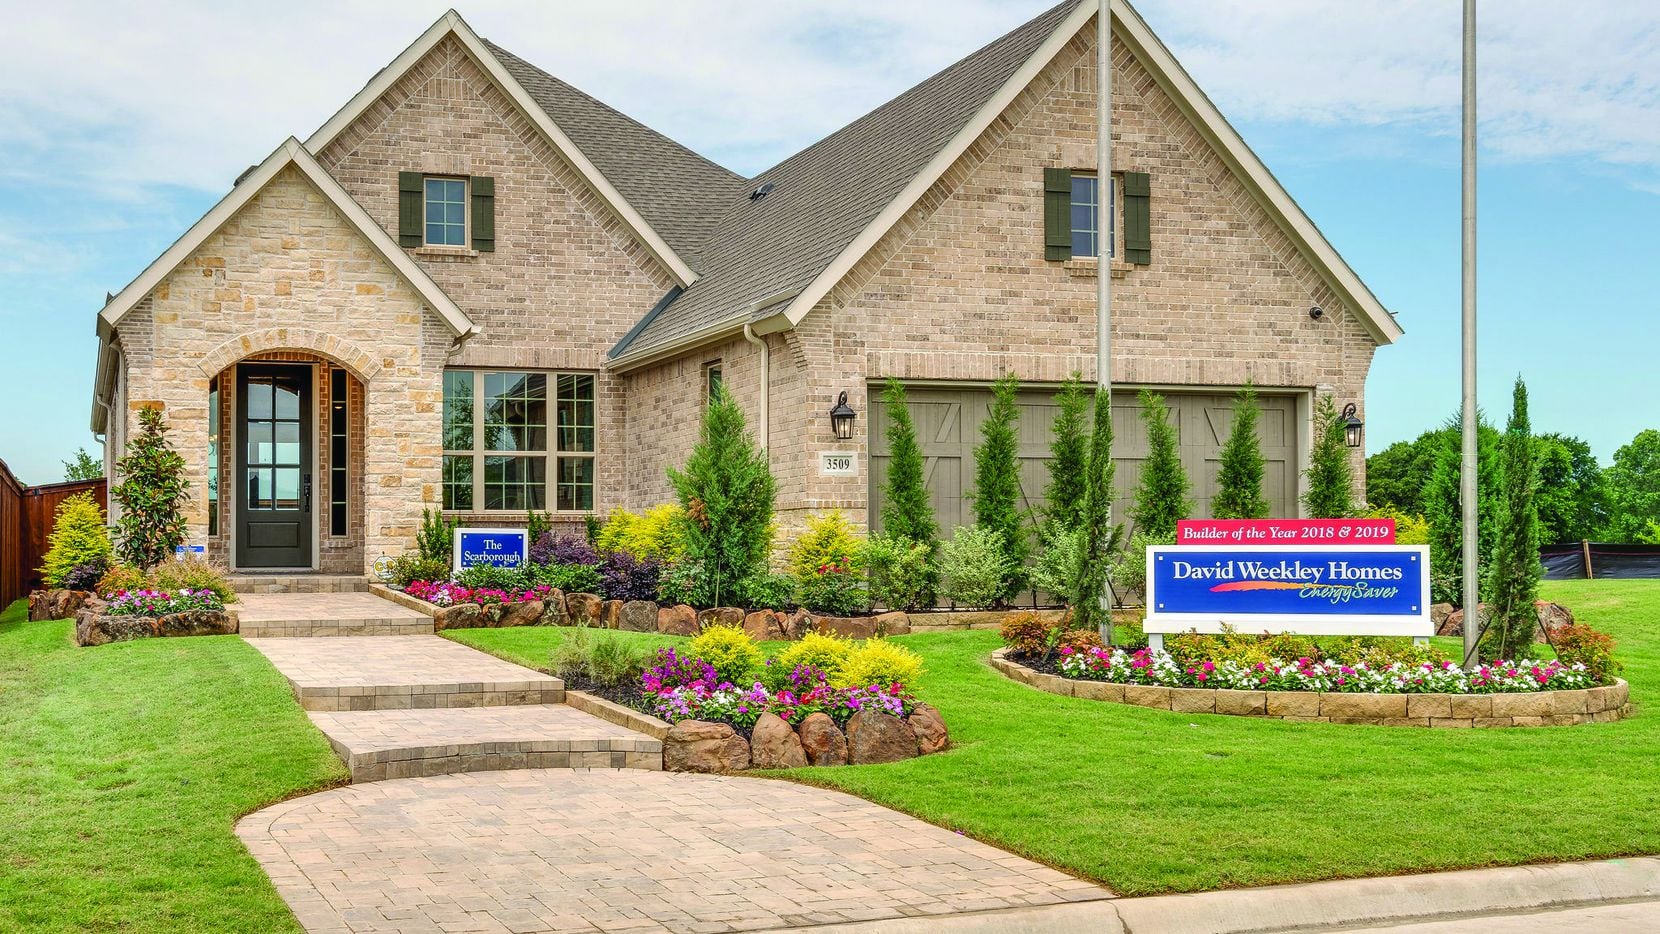 David Weekley offers one- and two-story floor plans priced from the high $200s in Prairie...